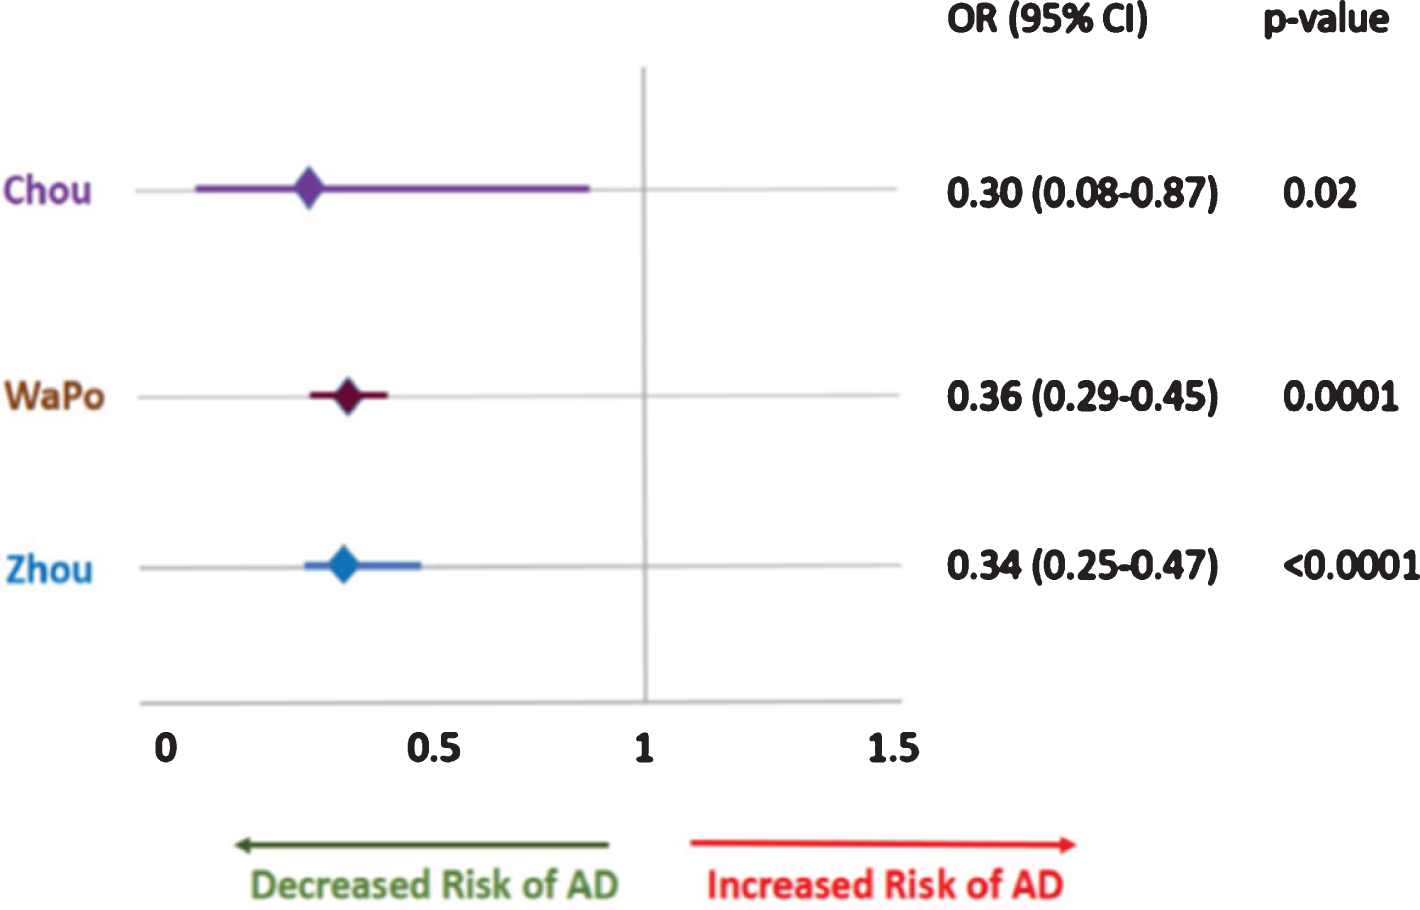 Etanercept was associated with OR of 0.30, 0.34 and 0.36 in the 3 large epidemiological studies focusing its effect on the incidence of AD [15–17].